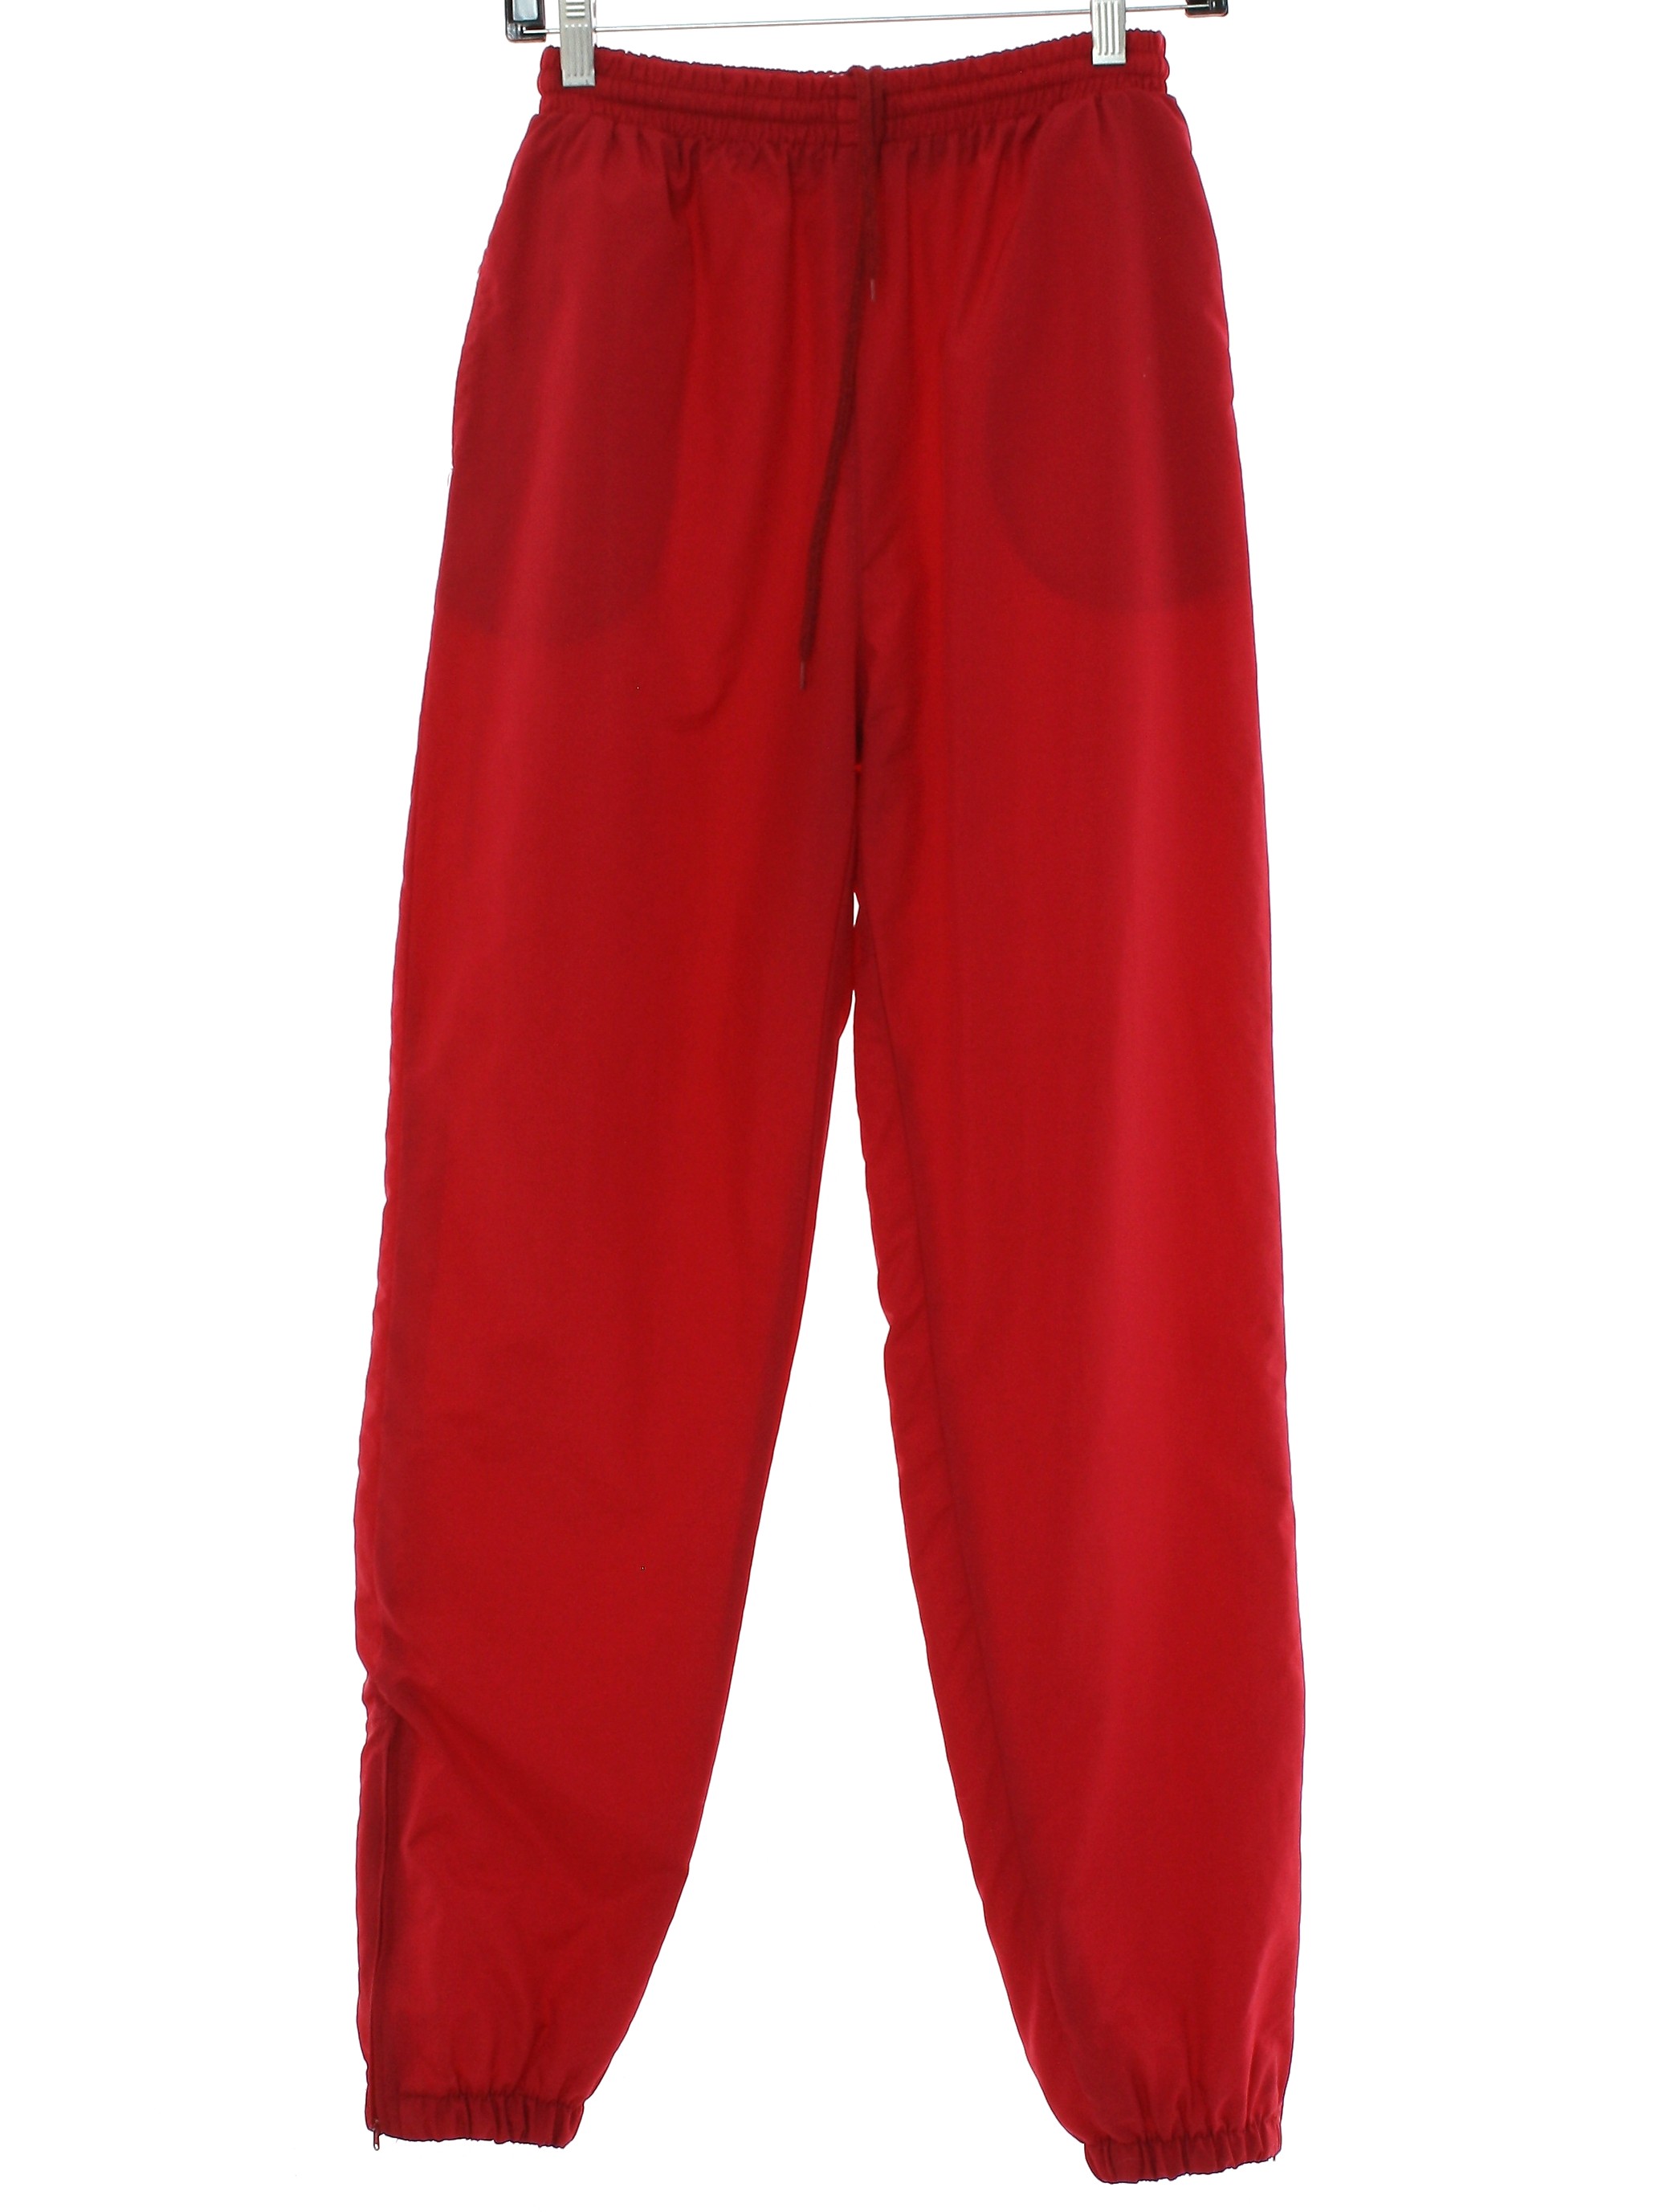 80s Vintage Pro Spirit Pants: 80s -Pro Spirit- Womens red nylon shell with  polyester lining track pants. Elastic pull on waistband with front inside  drawstring ties and side inset pockets, zippered elastic